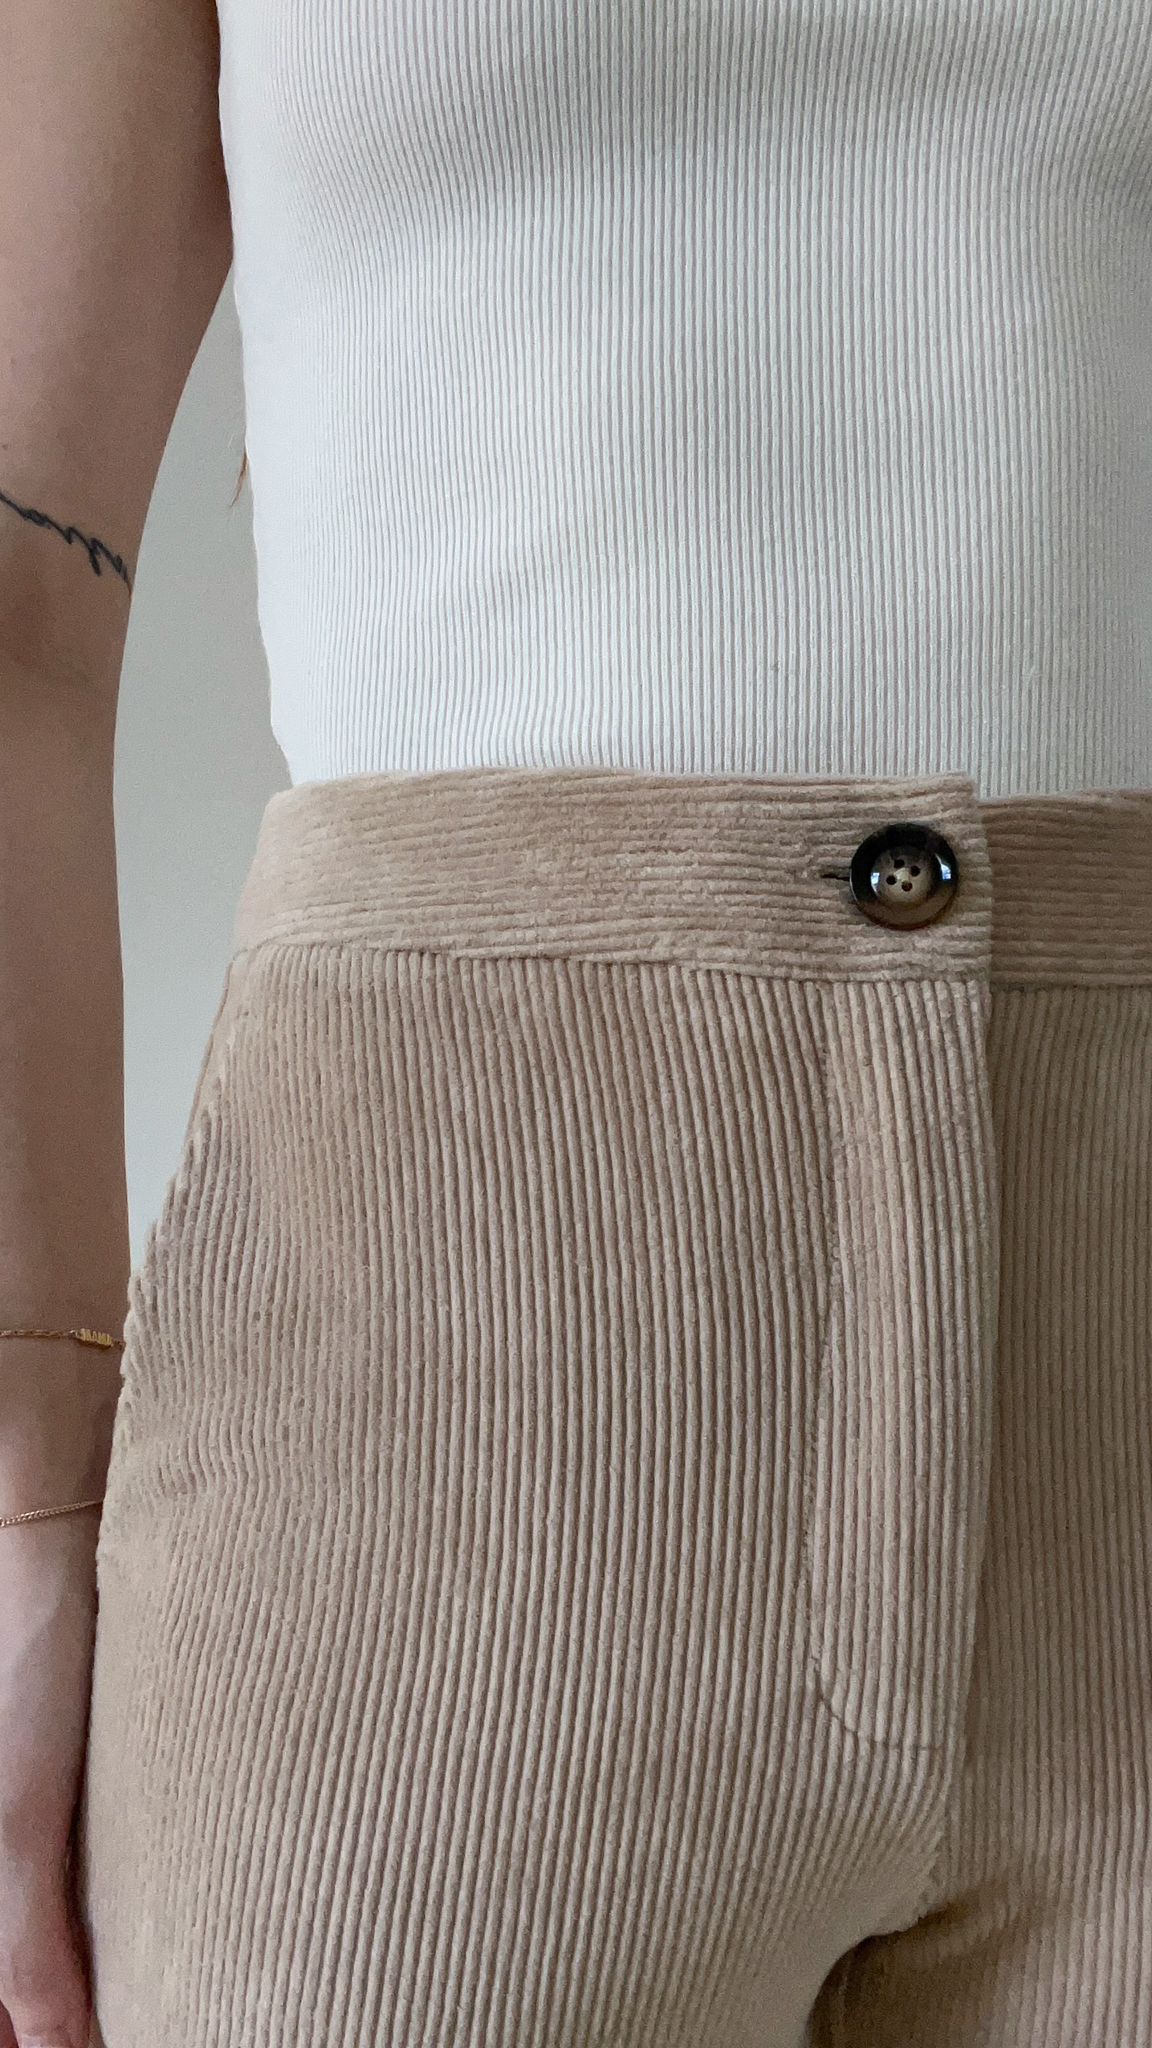 Beige straight leg trouser chordoroy with brown button